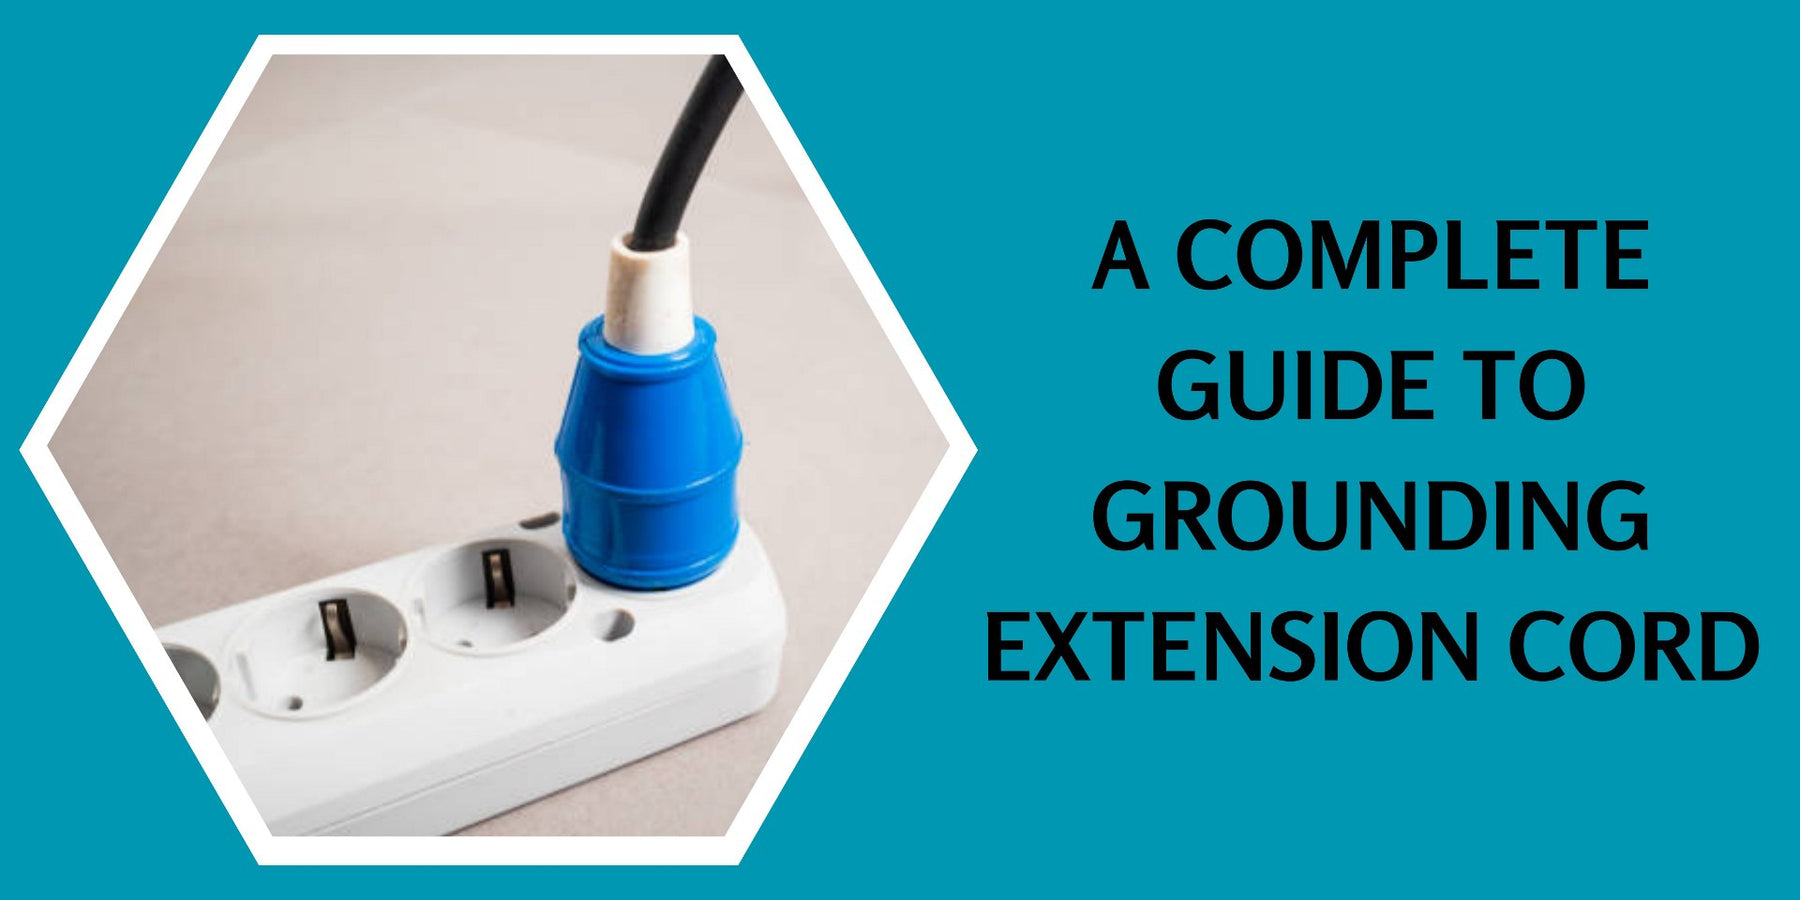 A Complete Guide to Grounding Extension Cord